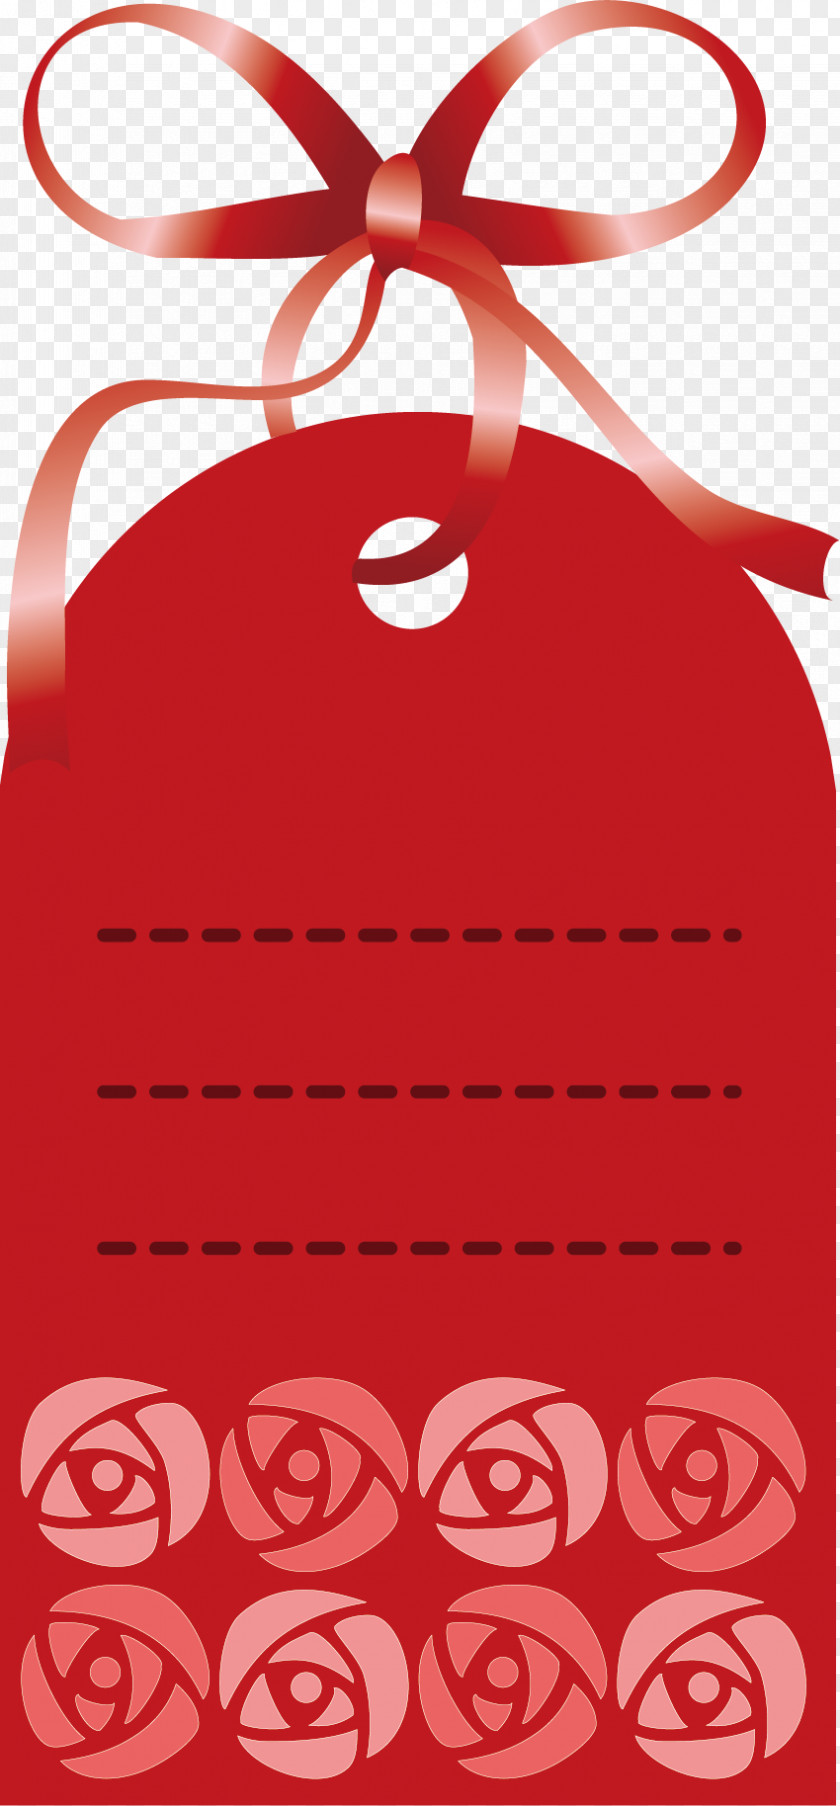 Red Tag Graphic Design PNG